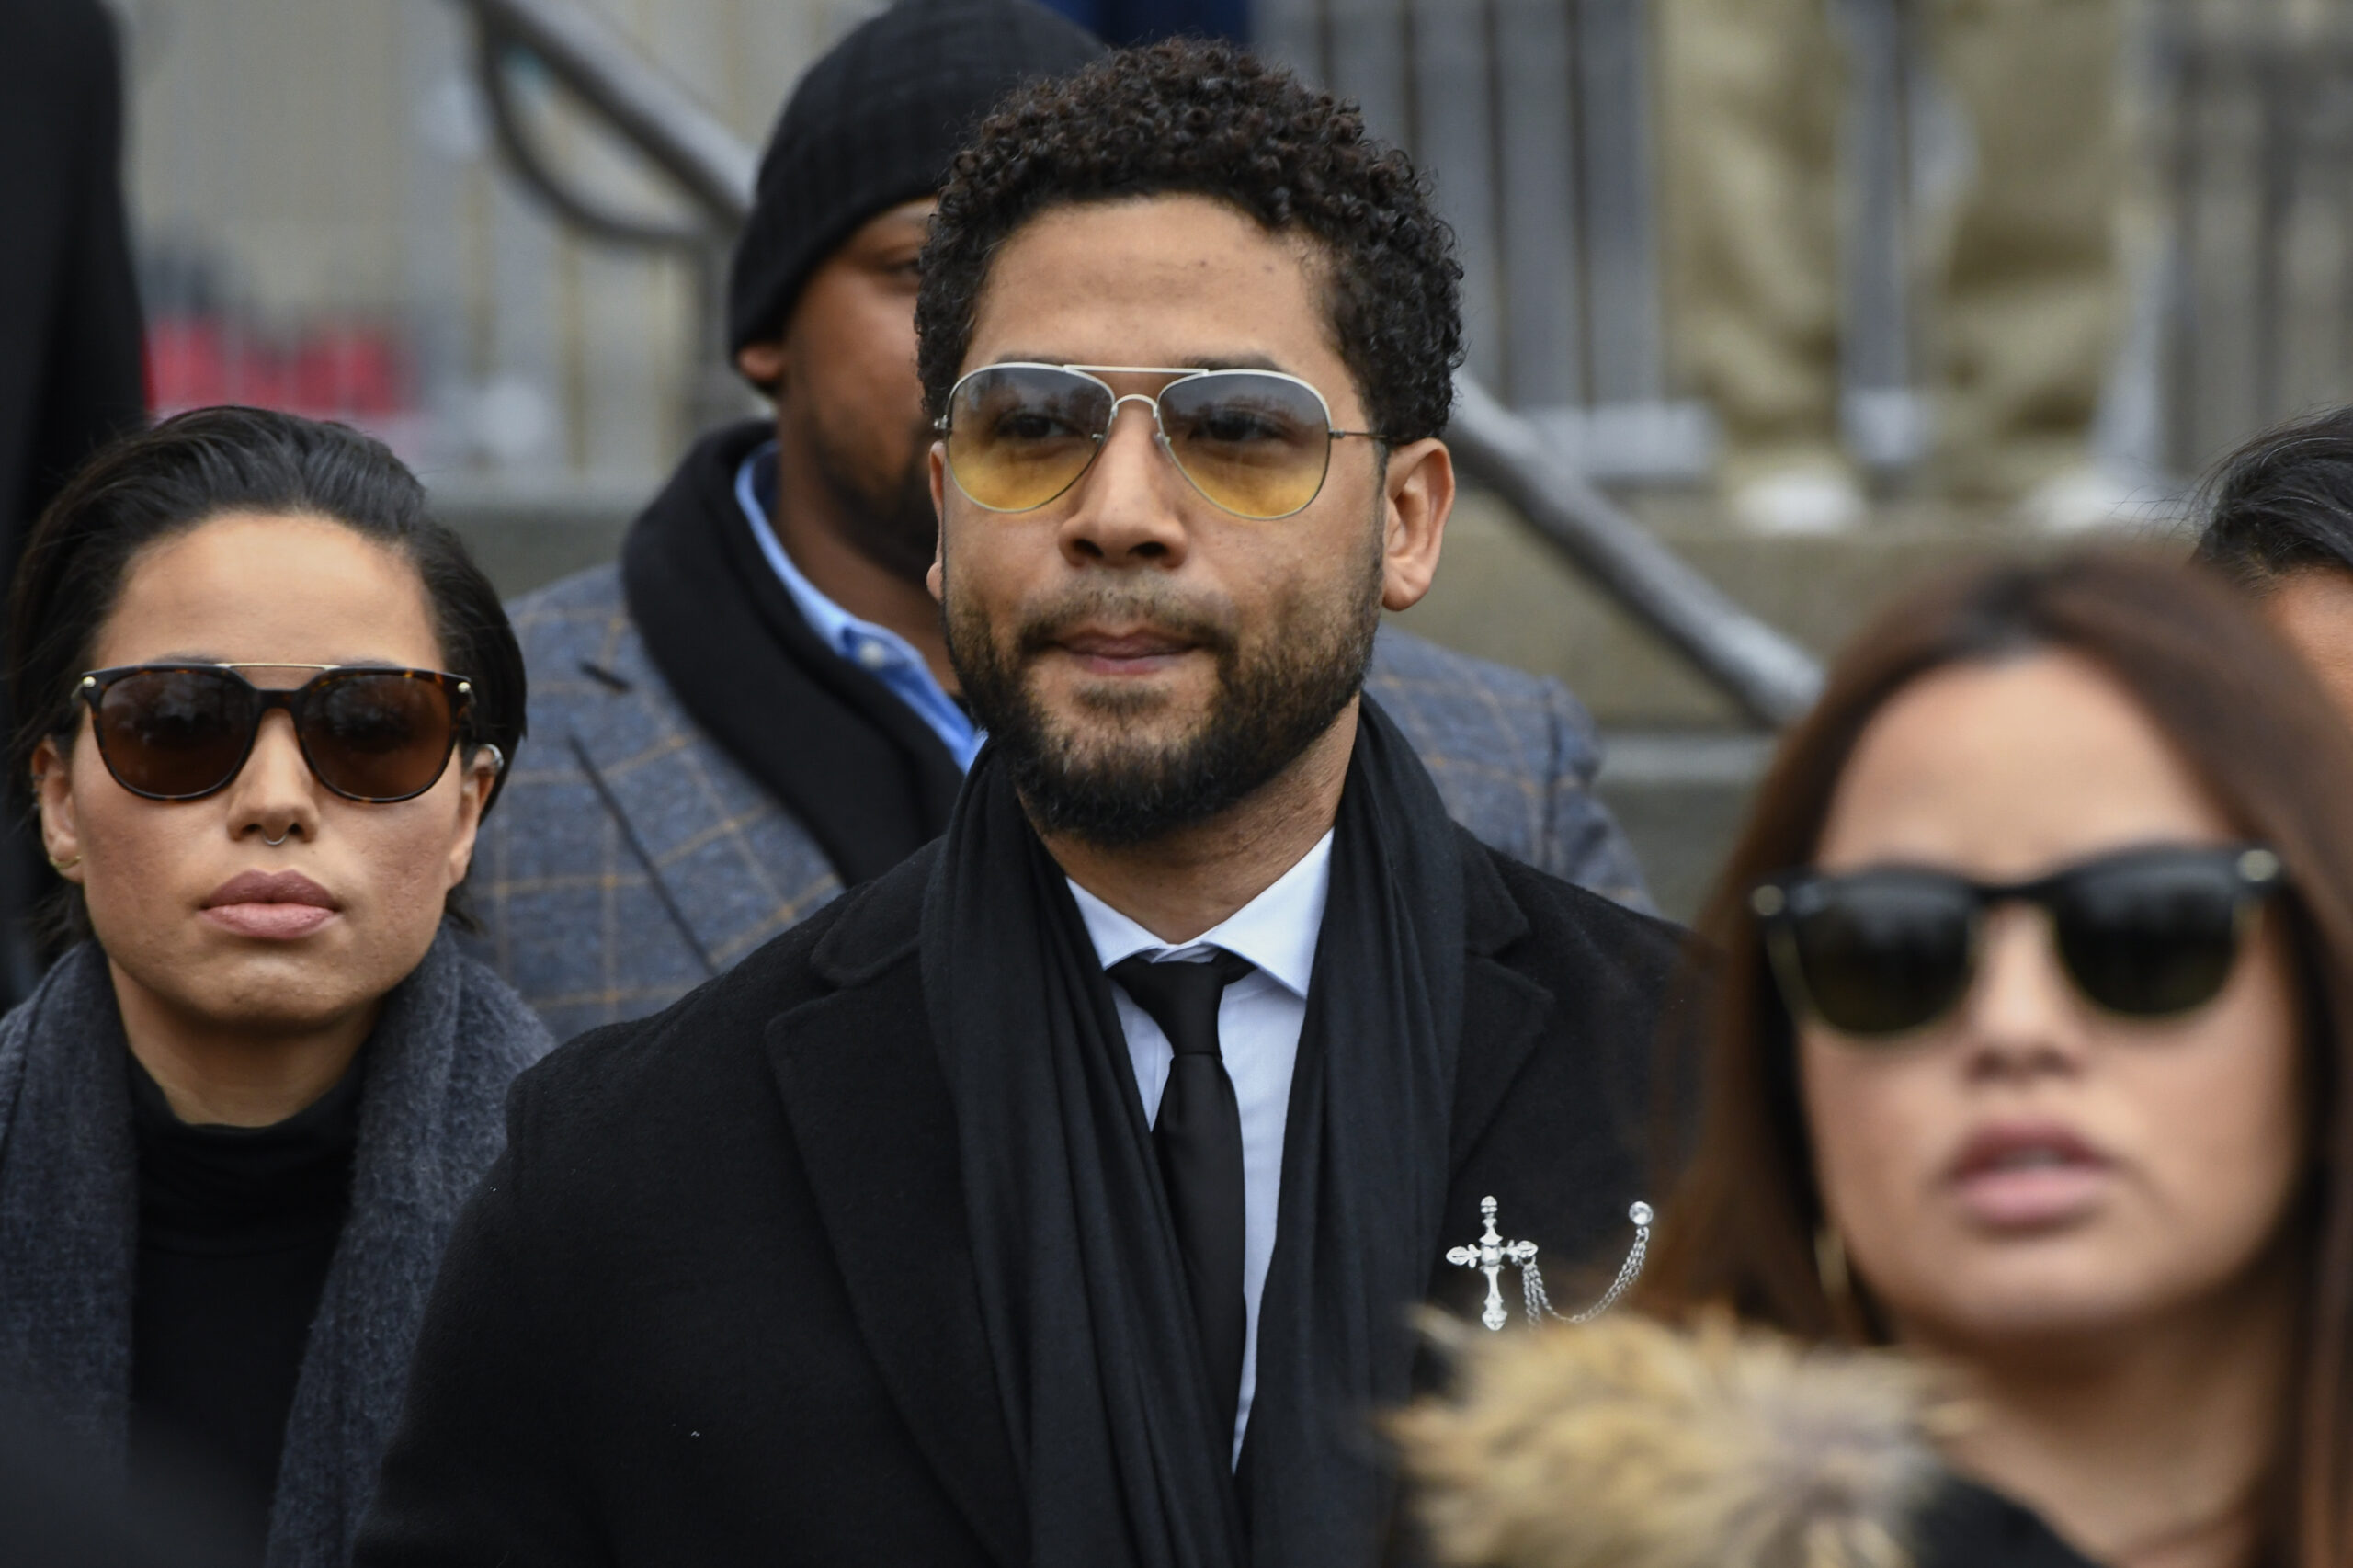 FILE - Former "Empire" actor Jussie Smollett leaves the Leighton Criminal Courthouse in Chicago, Feb. 24, 2020. Smollett's trial will boil down to the question of whether the jury believes the actor's version of what he says was a racist and homophobic attack or that told by two brothers who say they helped the actor fake the attack. The trial starts with jury selection Monday, Nov. 29, 2021 and is expected to last a week. (AP Photo/Matt Marton, file)